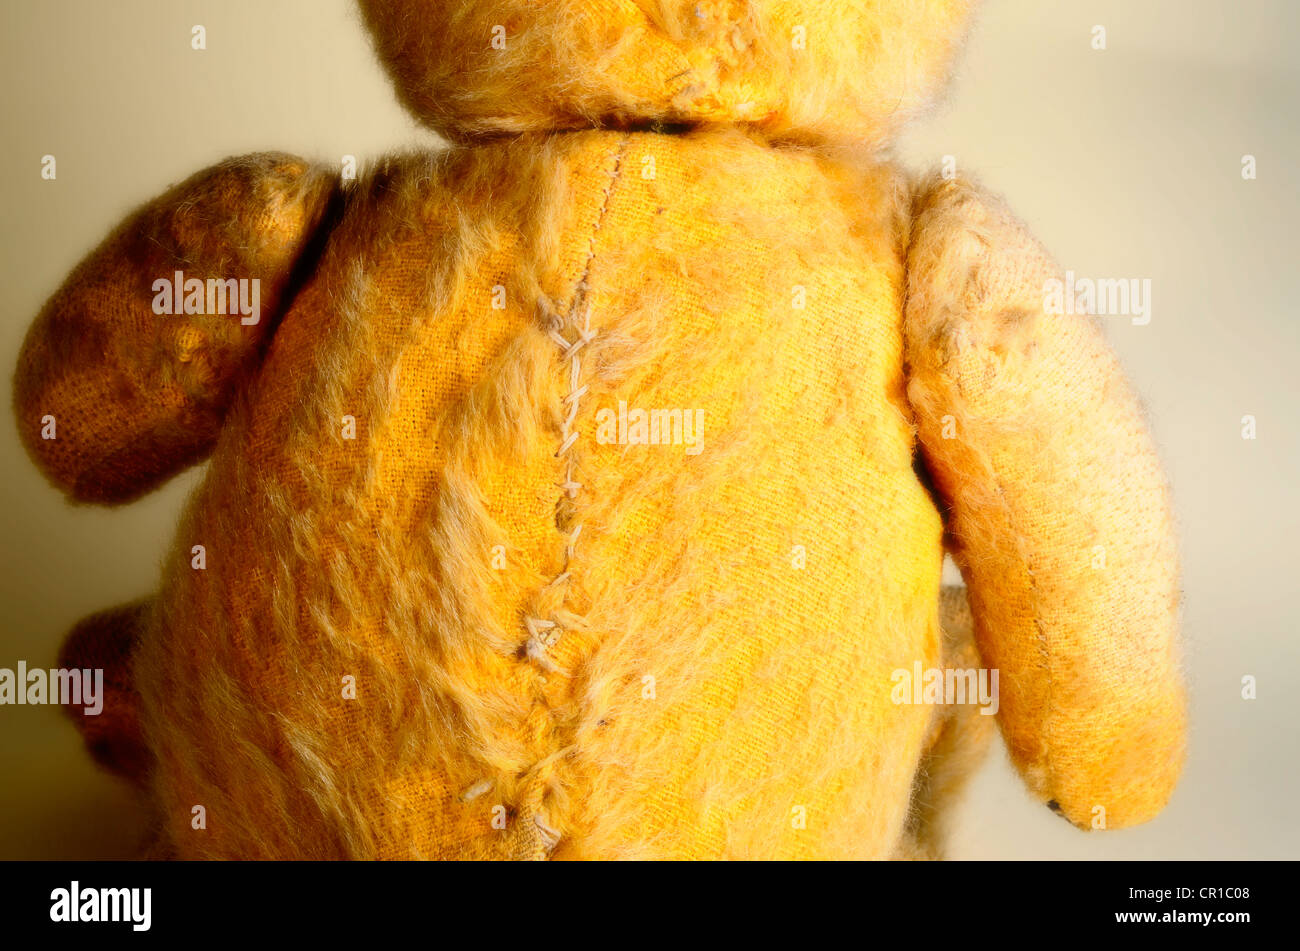 back of old teddy bear showing stitching Stock Photo